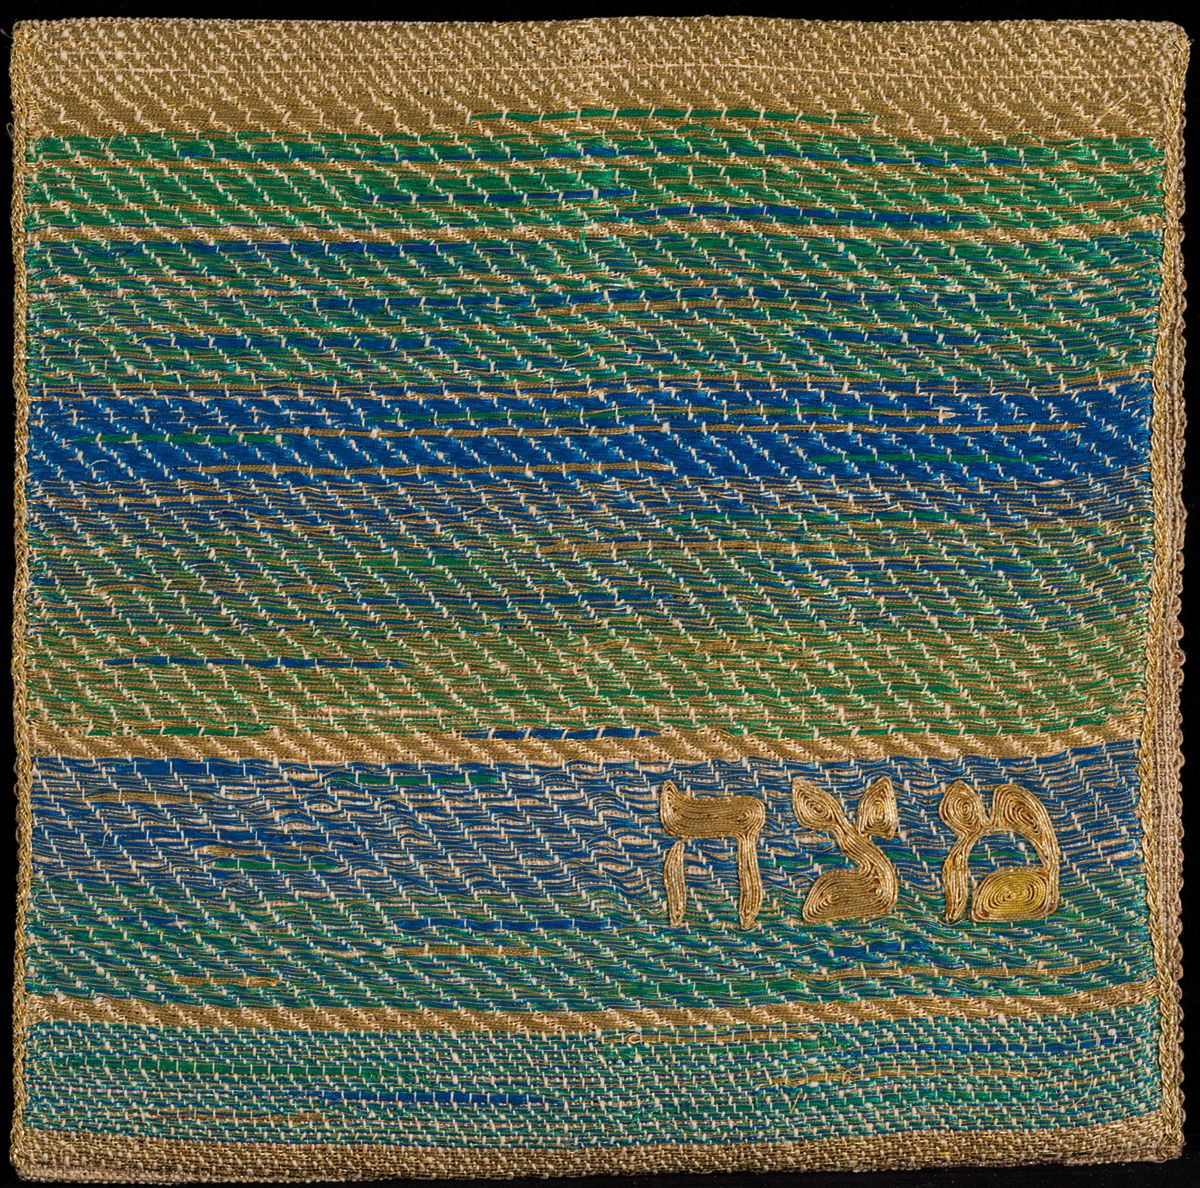 Matzah cover by Anni Albers, 1959, bast fiber and metallic threads, metallic cellophane The Jewish Museum, New York. Gift of Tamar Cohen, 2021. © 2022 The Josef and Anni Albers Foundation / Artists Rights Society (ARS), New York